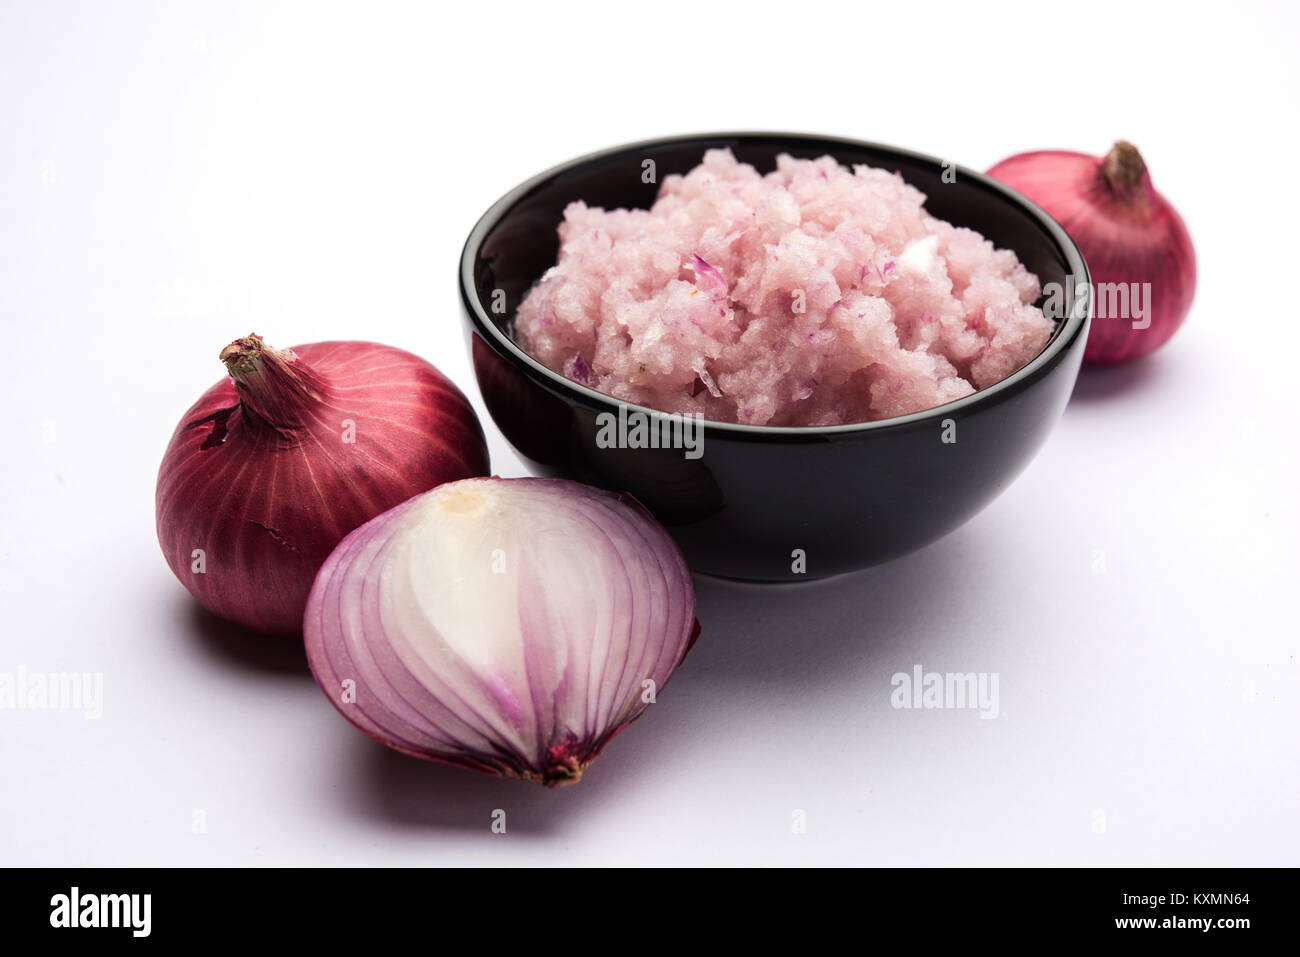 Onion Sauce or paste, in white or black ceramic bowl with raw cut onions, isolated over white background. Selective focus Stock Photo